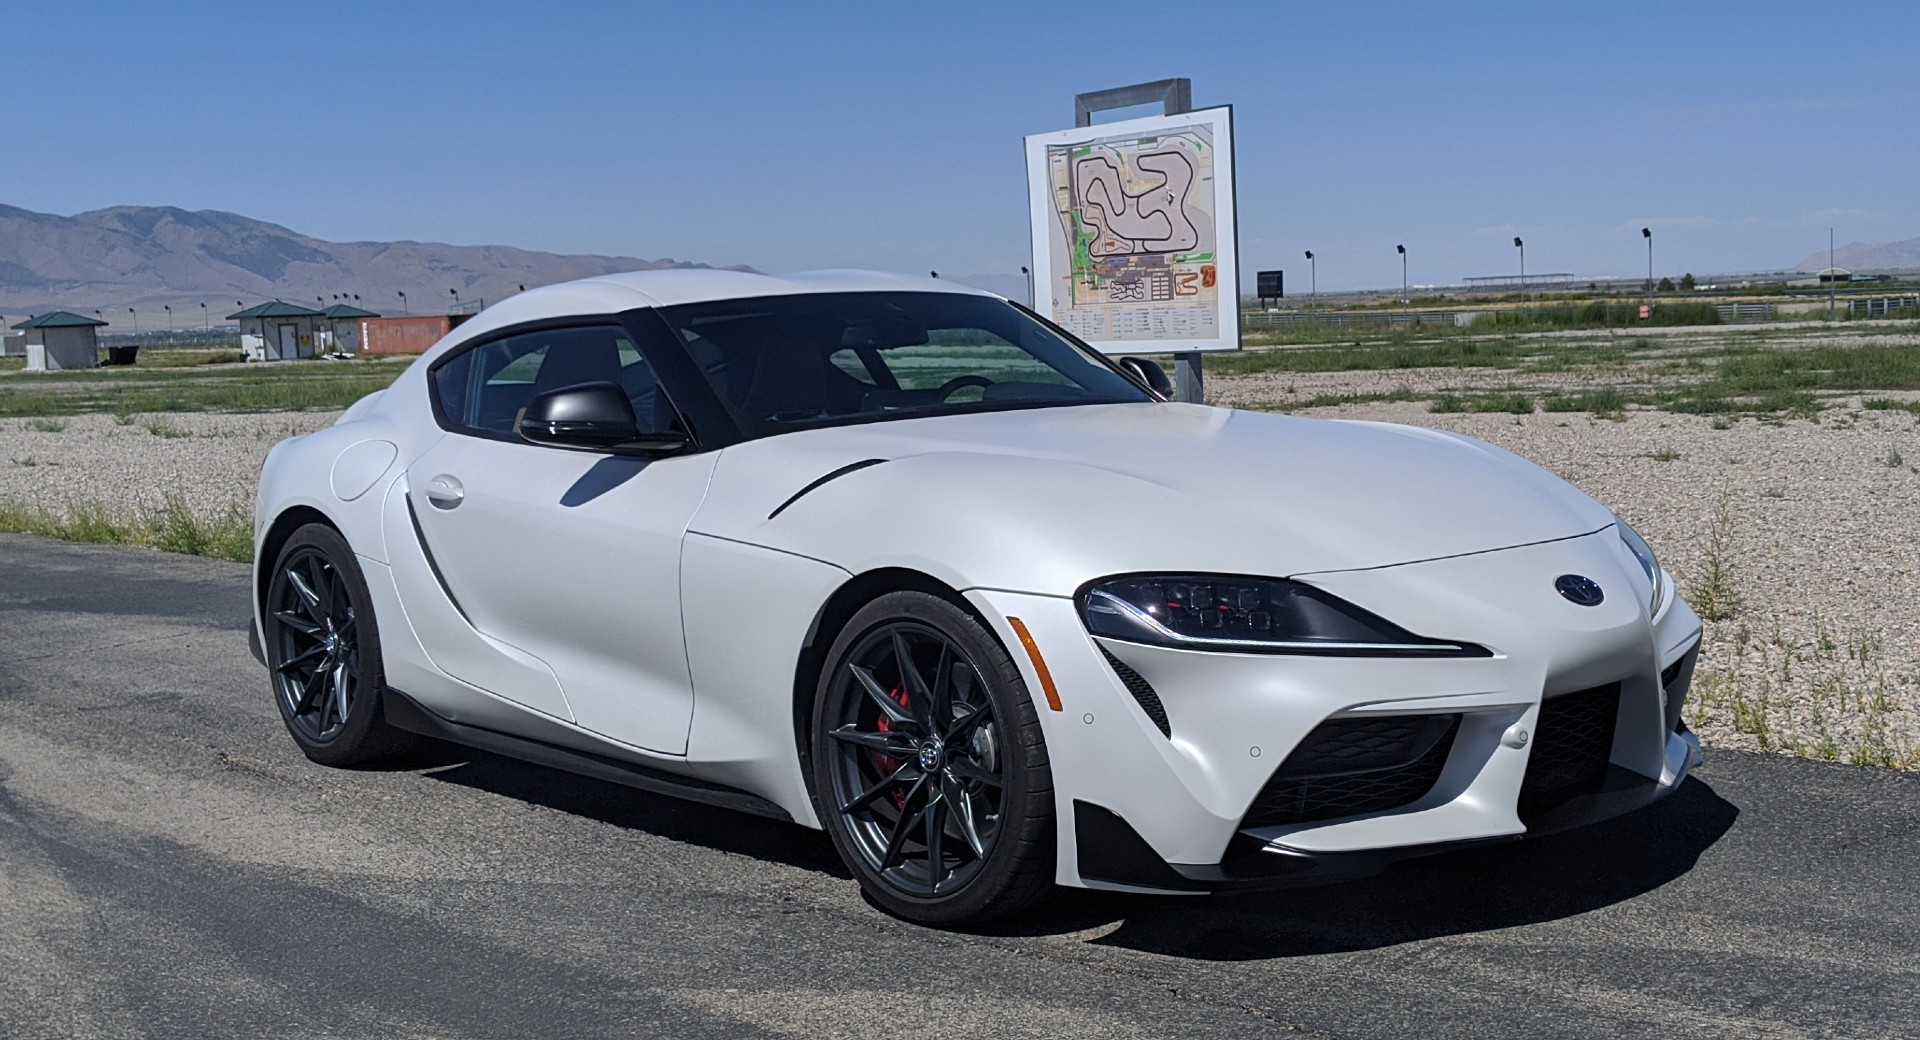 We’re Driving The Manual 2023 Toyota Supra, What Do You Want To Know